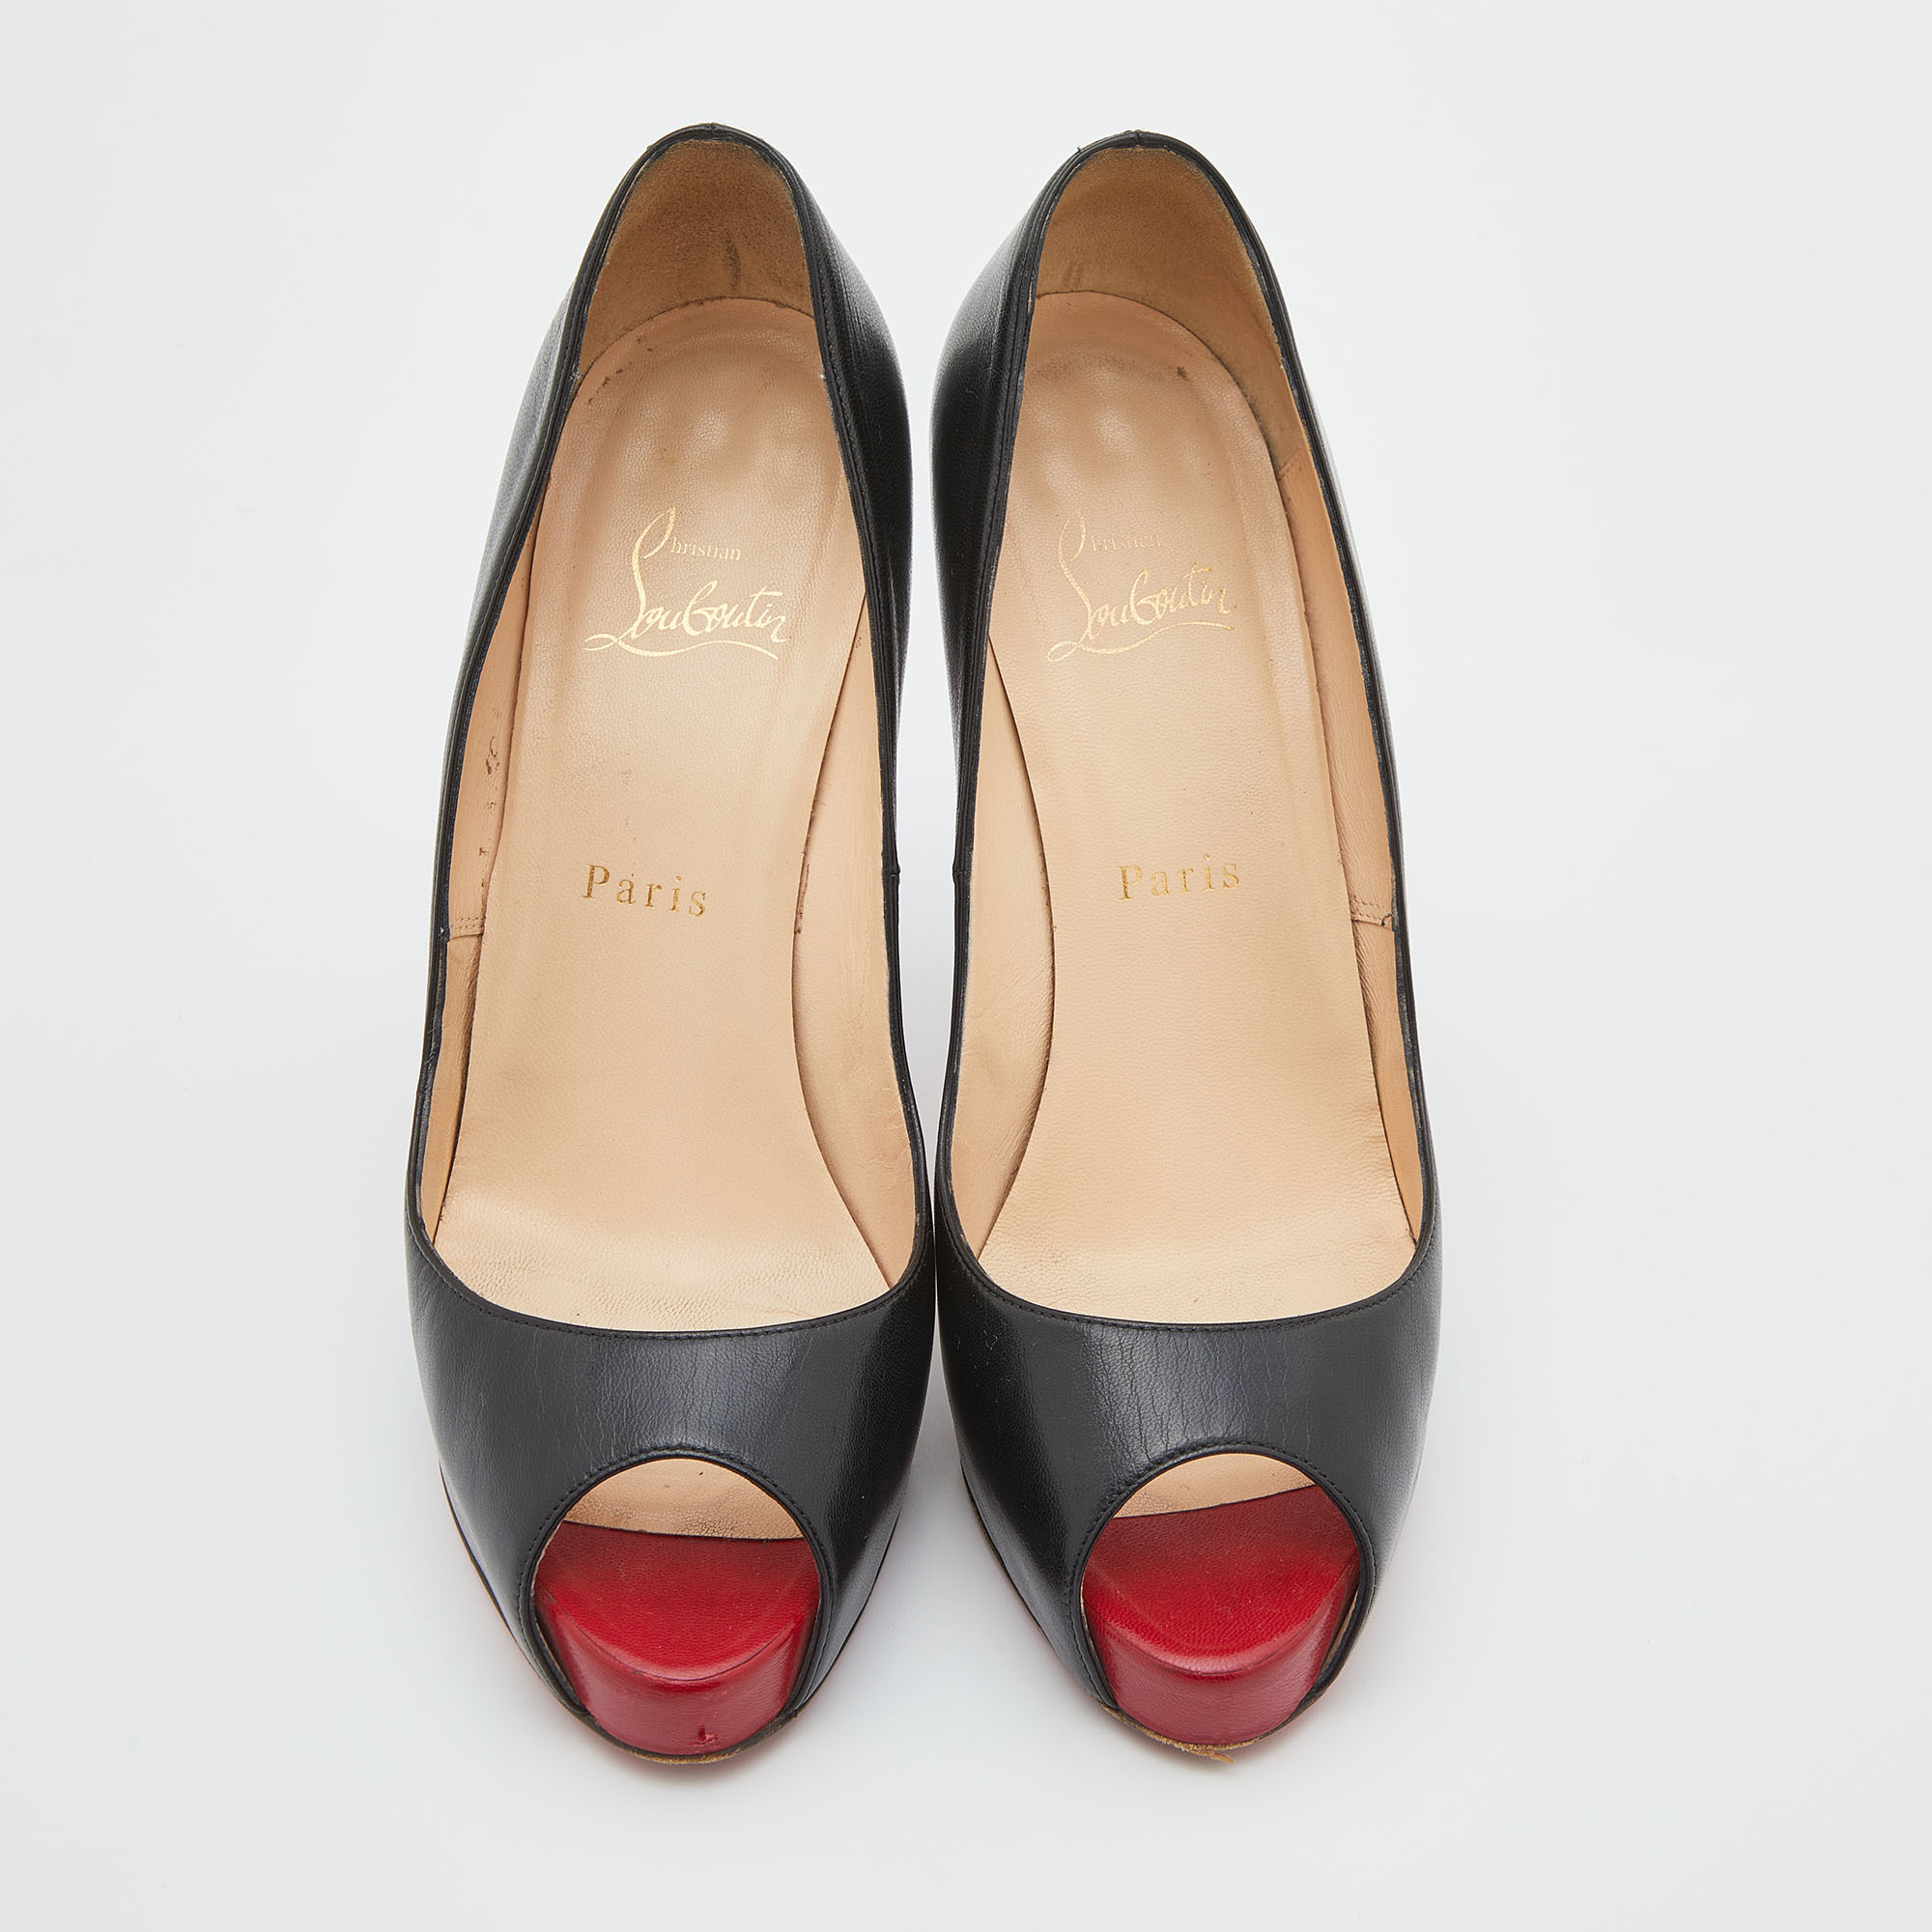 Christian Louboutin Black Leather New Very Prive Peep Toe Pumps Size 38.5